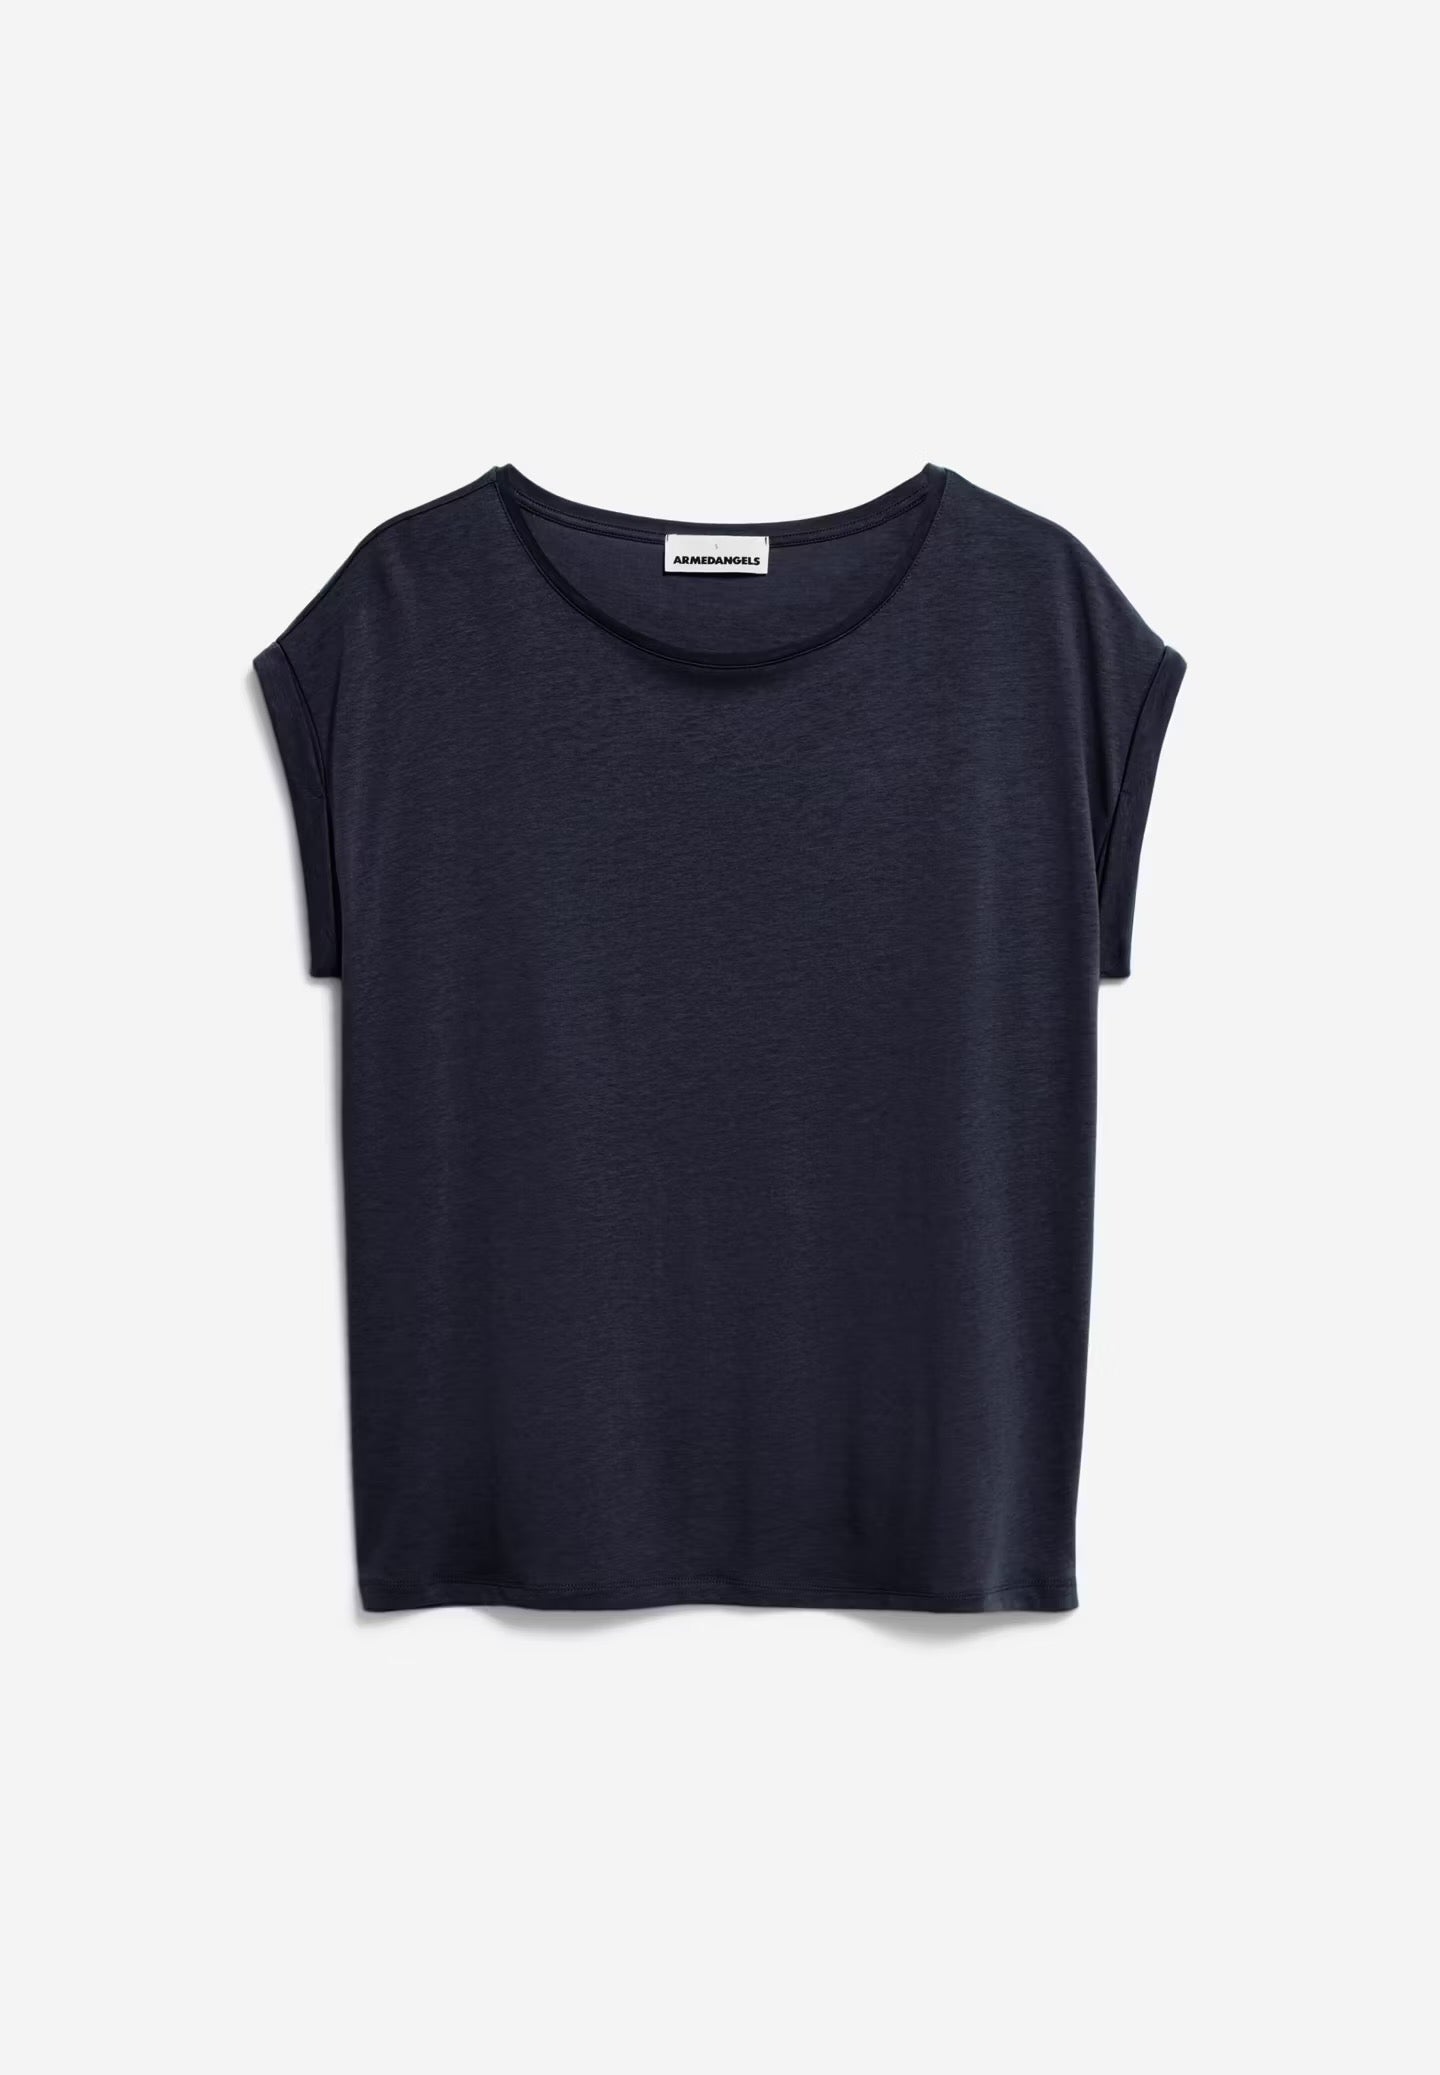 Relaxed fit cap sleeve t-shirt by ARMEDANGELS in navy blue, made from a sustainable TENCEL™ and organic cotton mix.